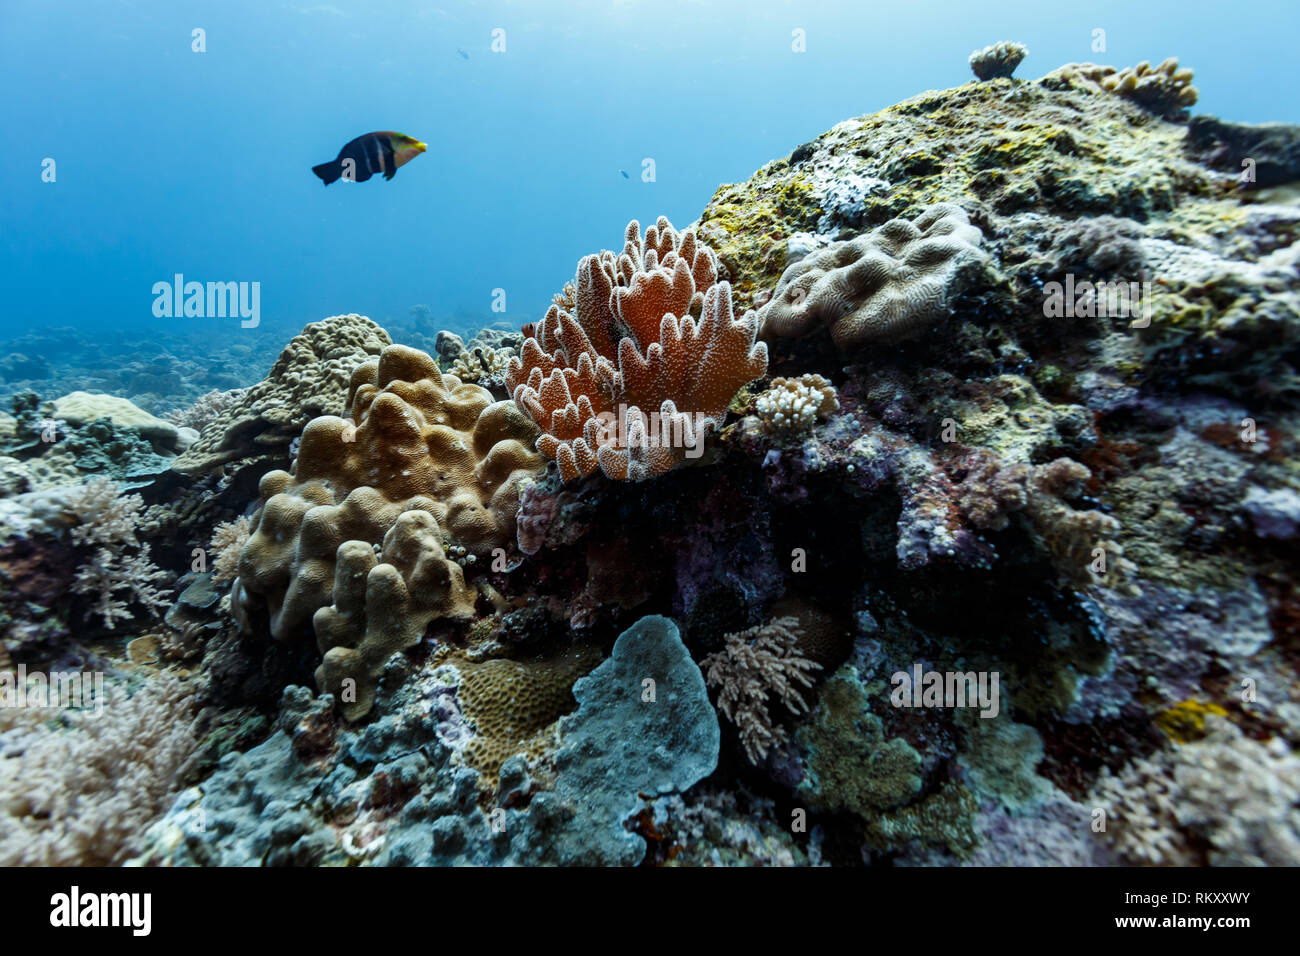 Closeup of coral colonies with moorish idol in background Stock Photo